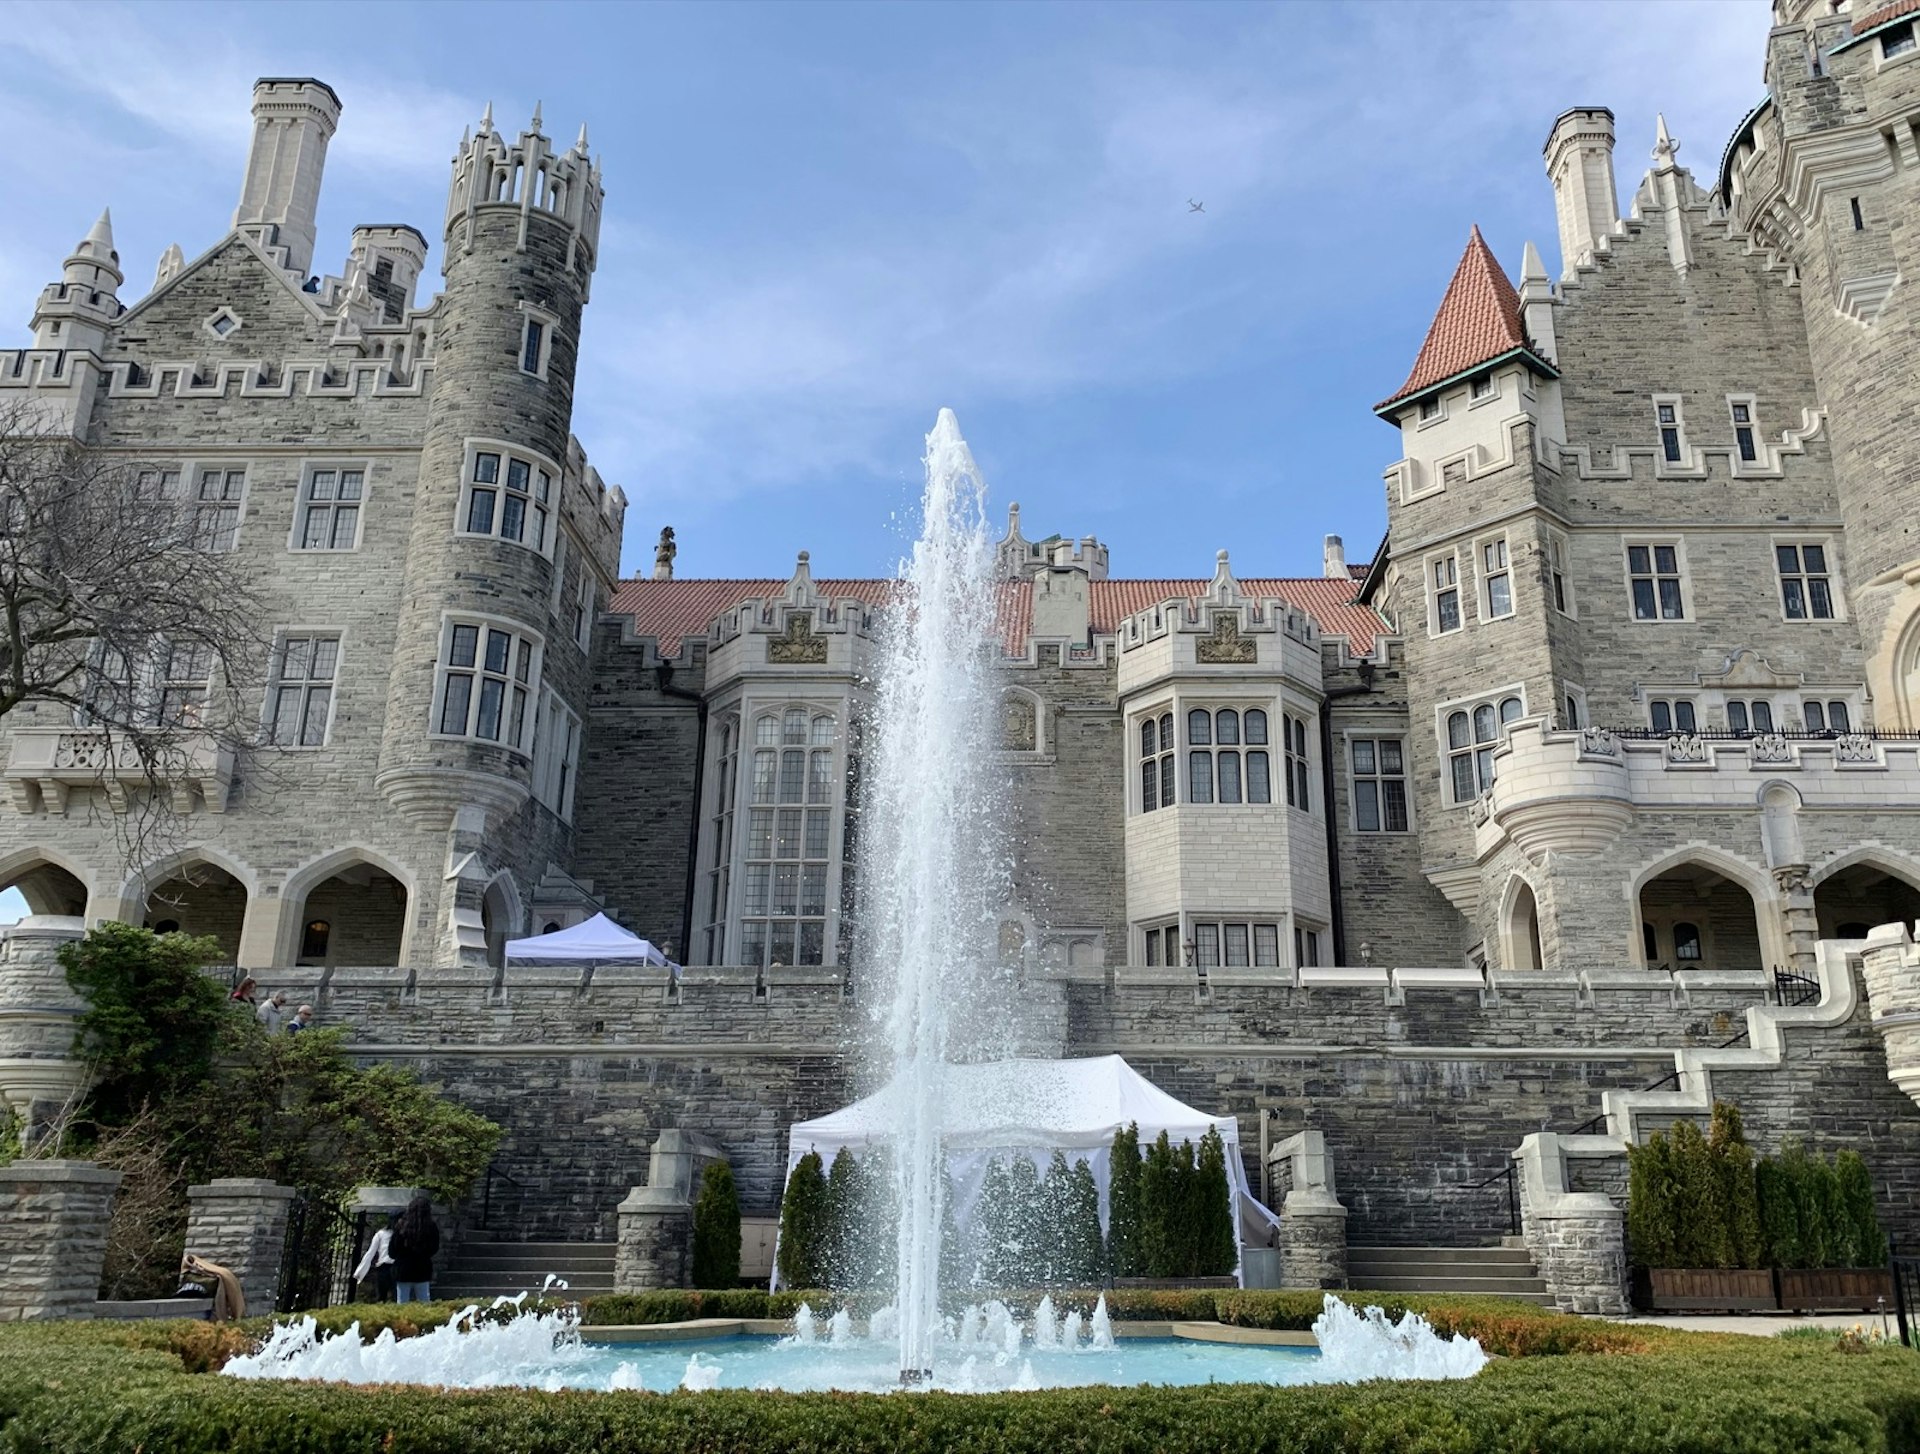 A very tall fountain is seen outside of the stone, castle-like facade of Casa Loma in Toronto